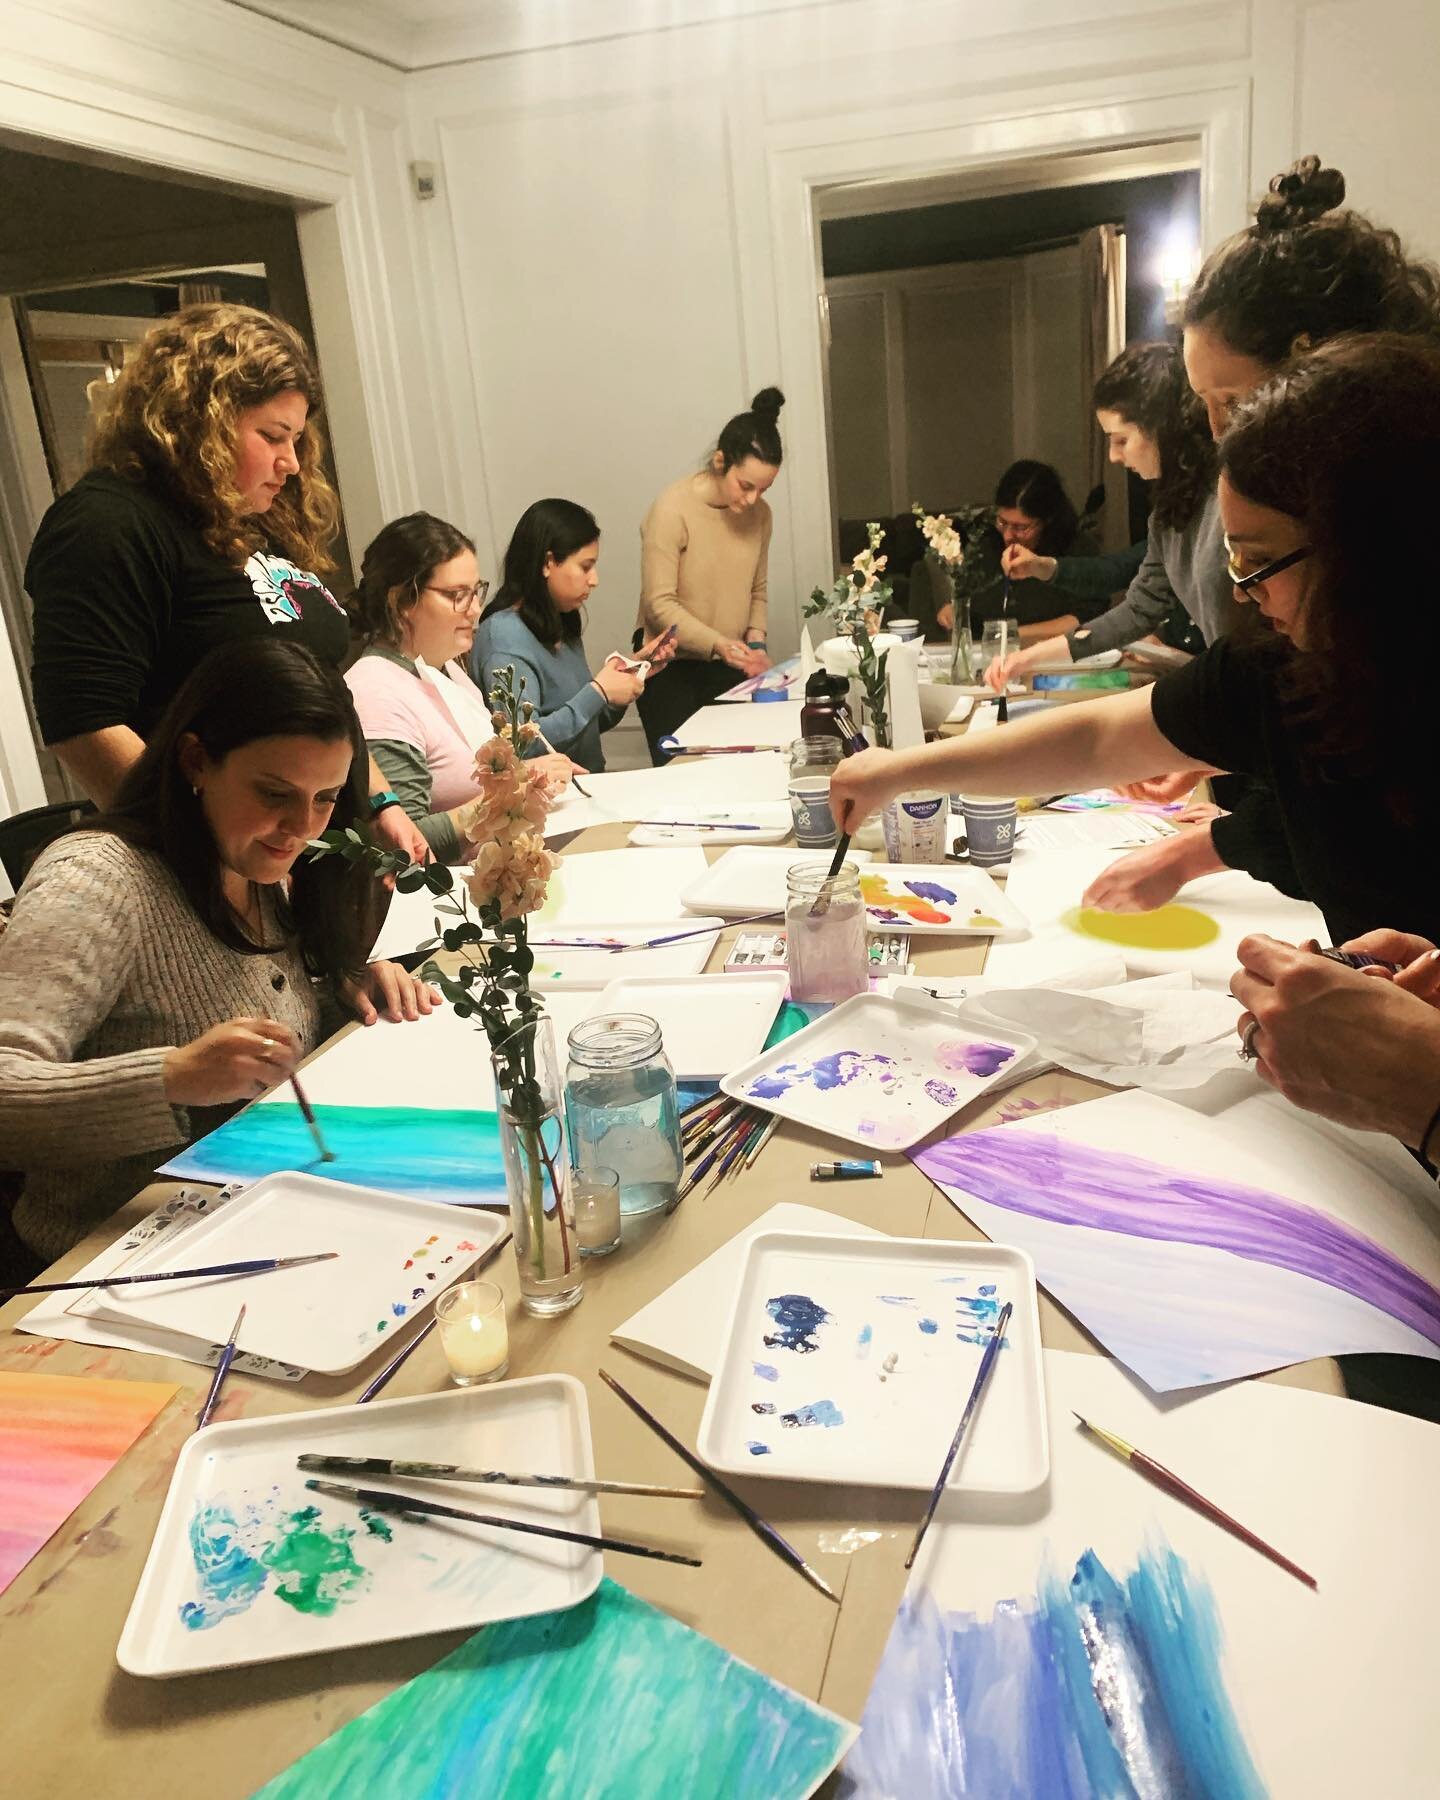 Some pics from an amazing SoulCircle last night!! Thank you @rifkachilloongoo for helping us bring out the idea of calm in a turbulent world through watercolors🎨